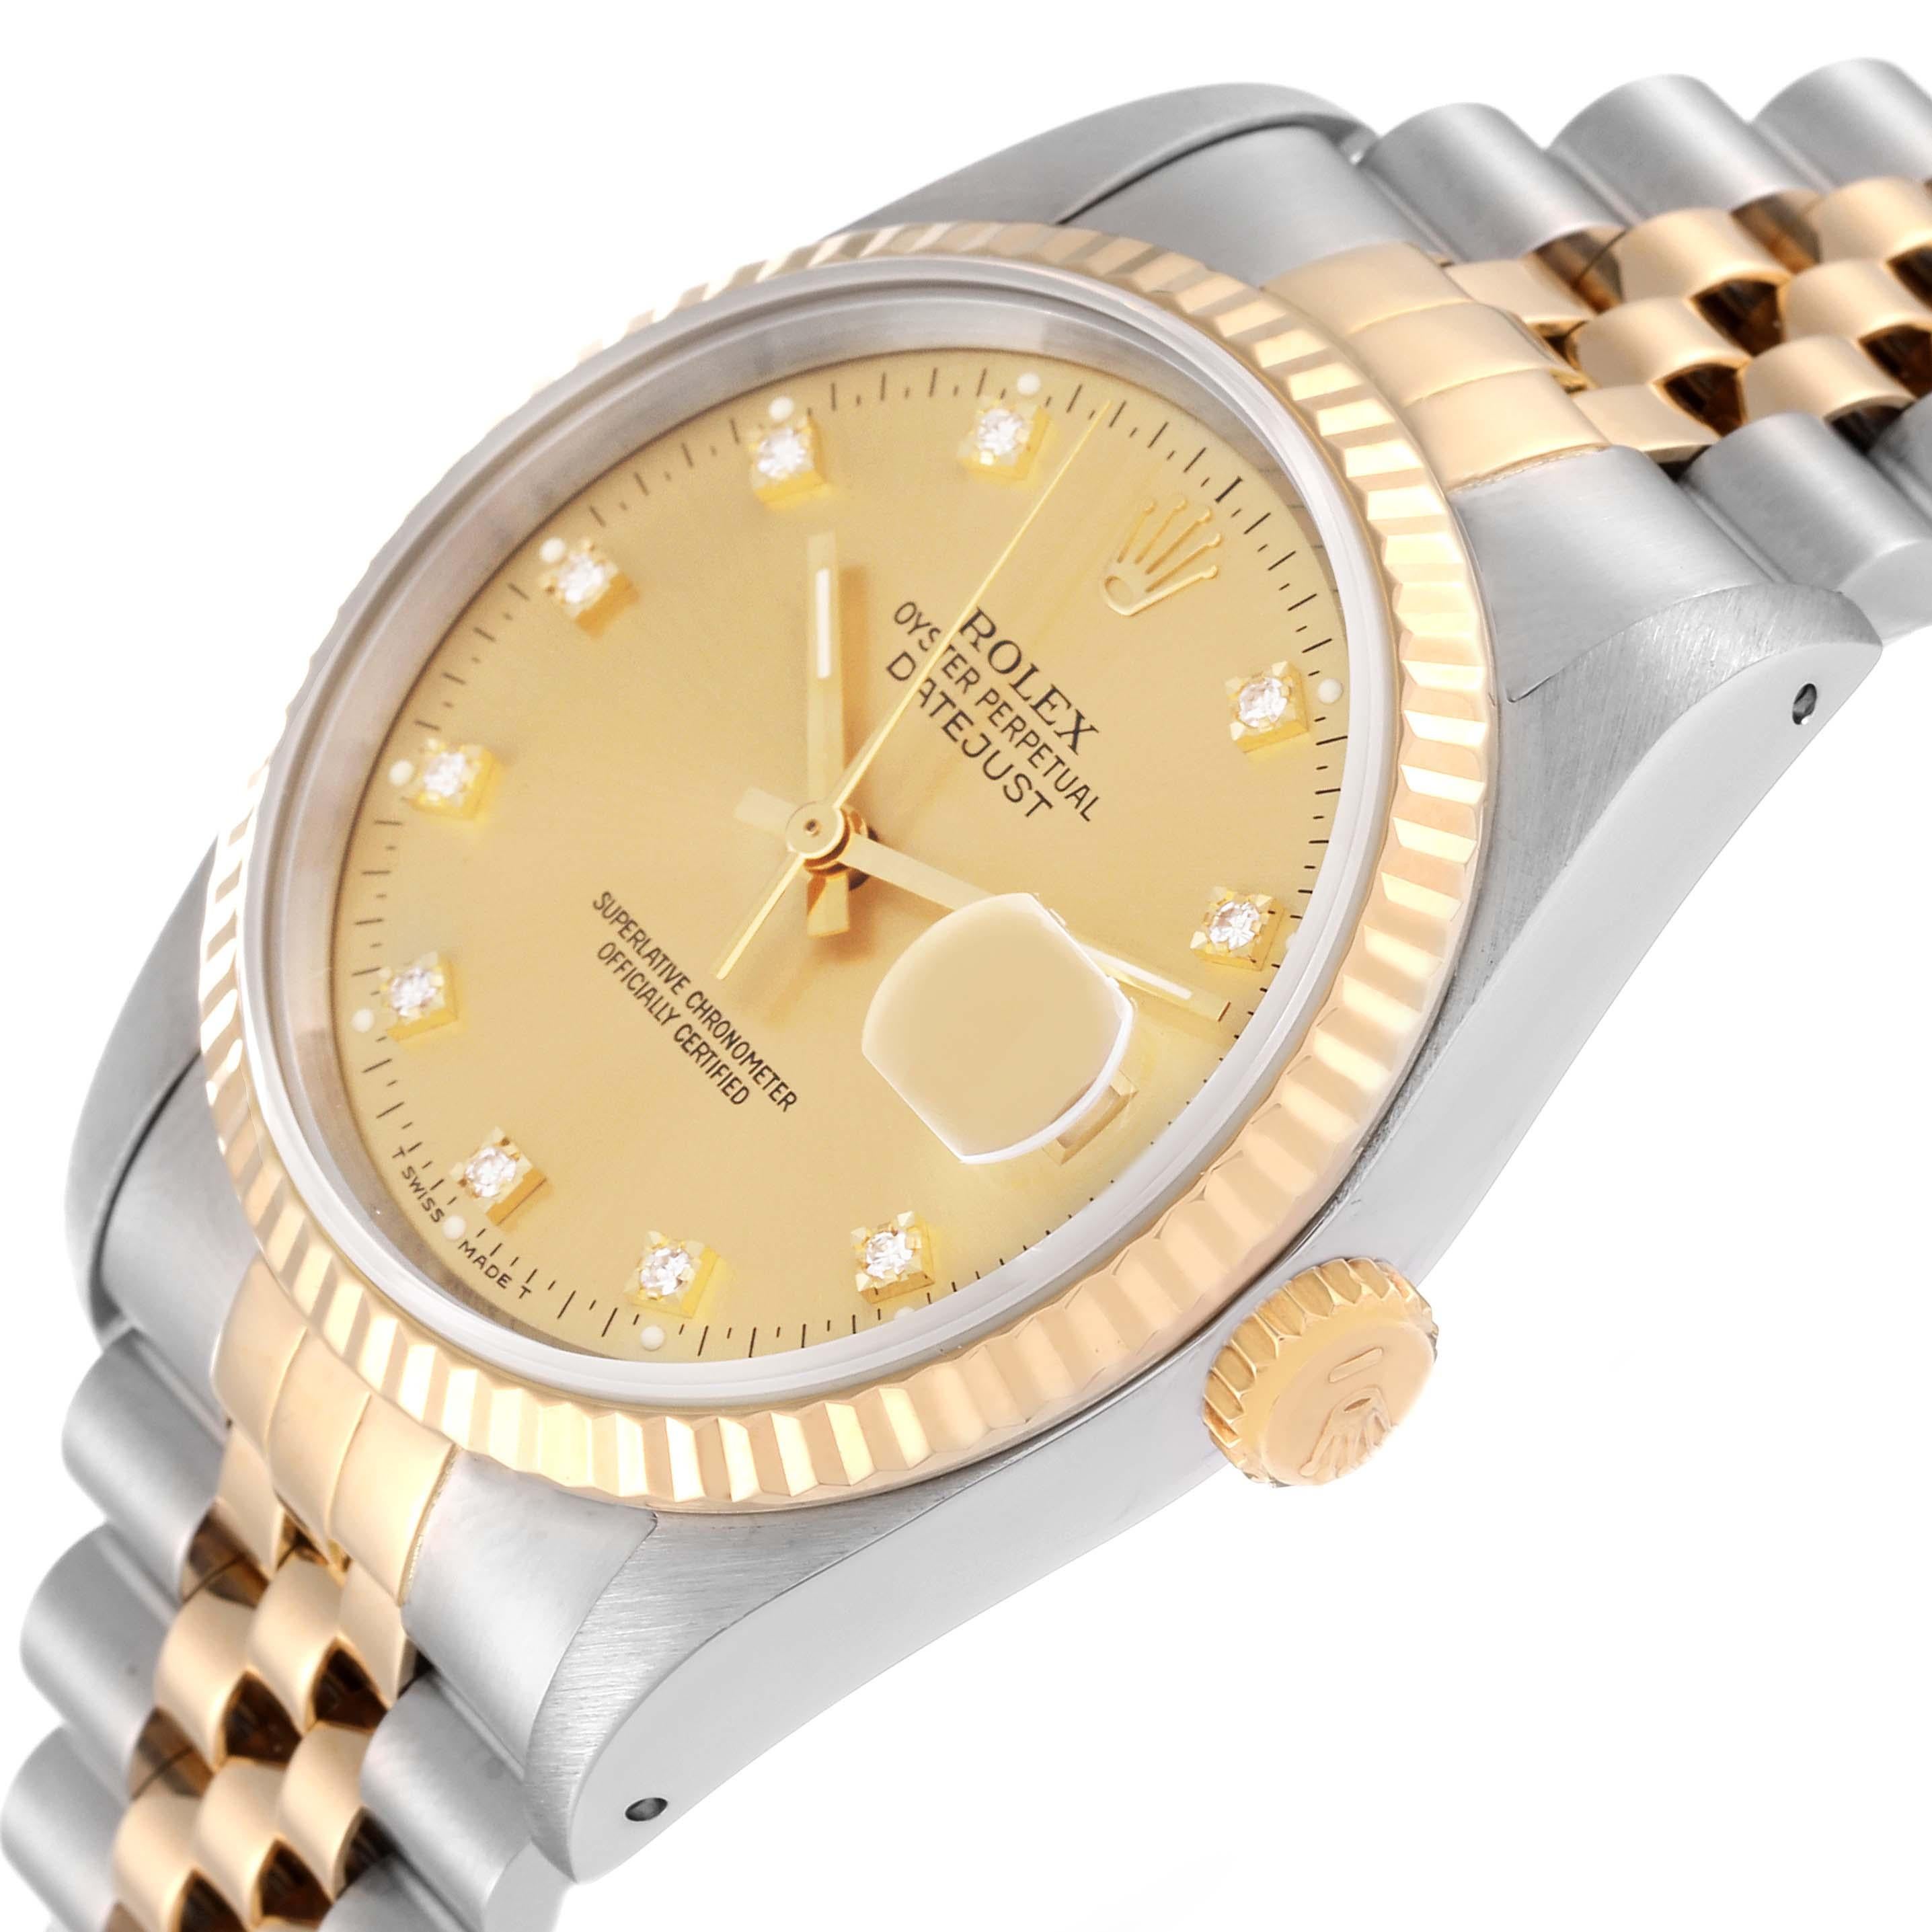 Rolex Datejust Diamond Dial Steel Yellow Gold Mens Watch 16233 For Sale 1